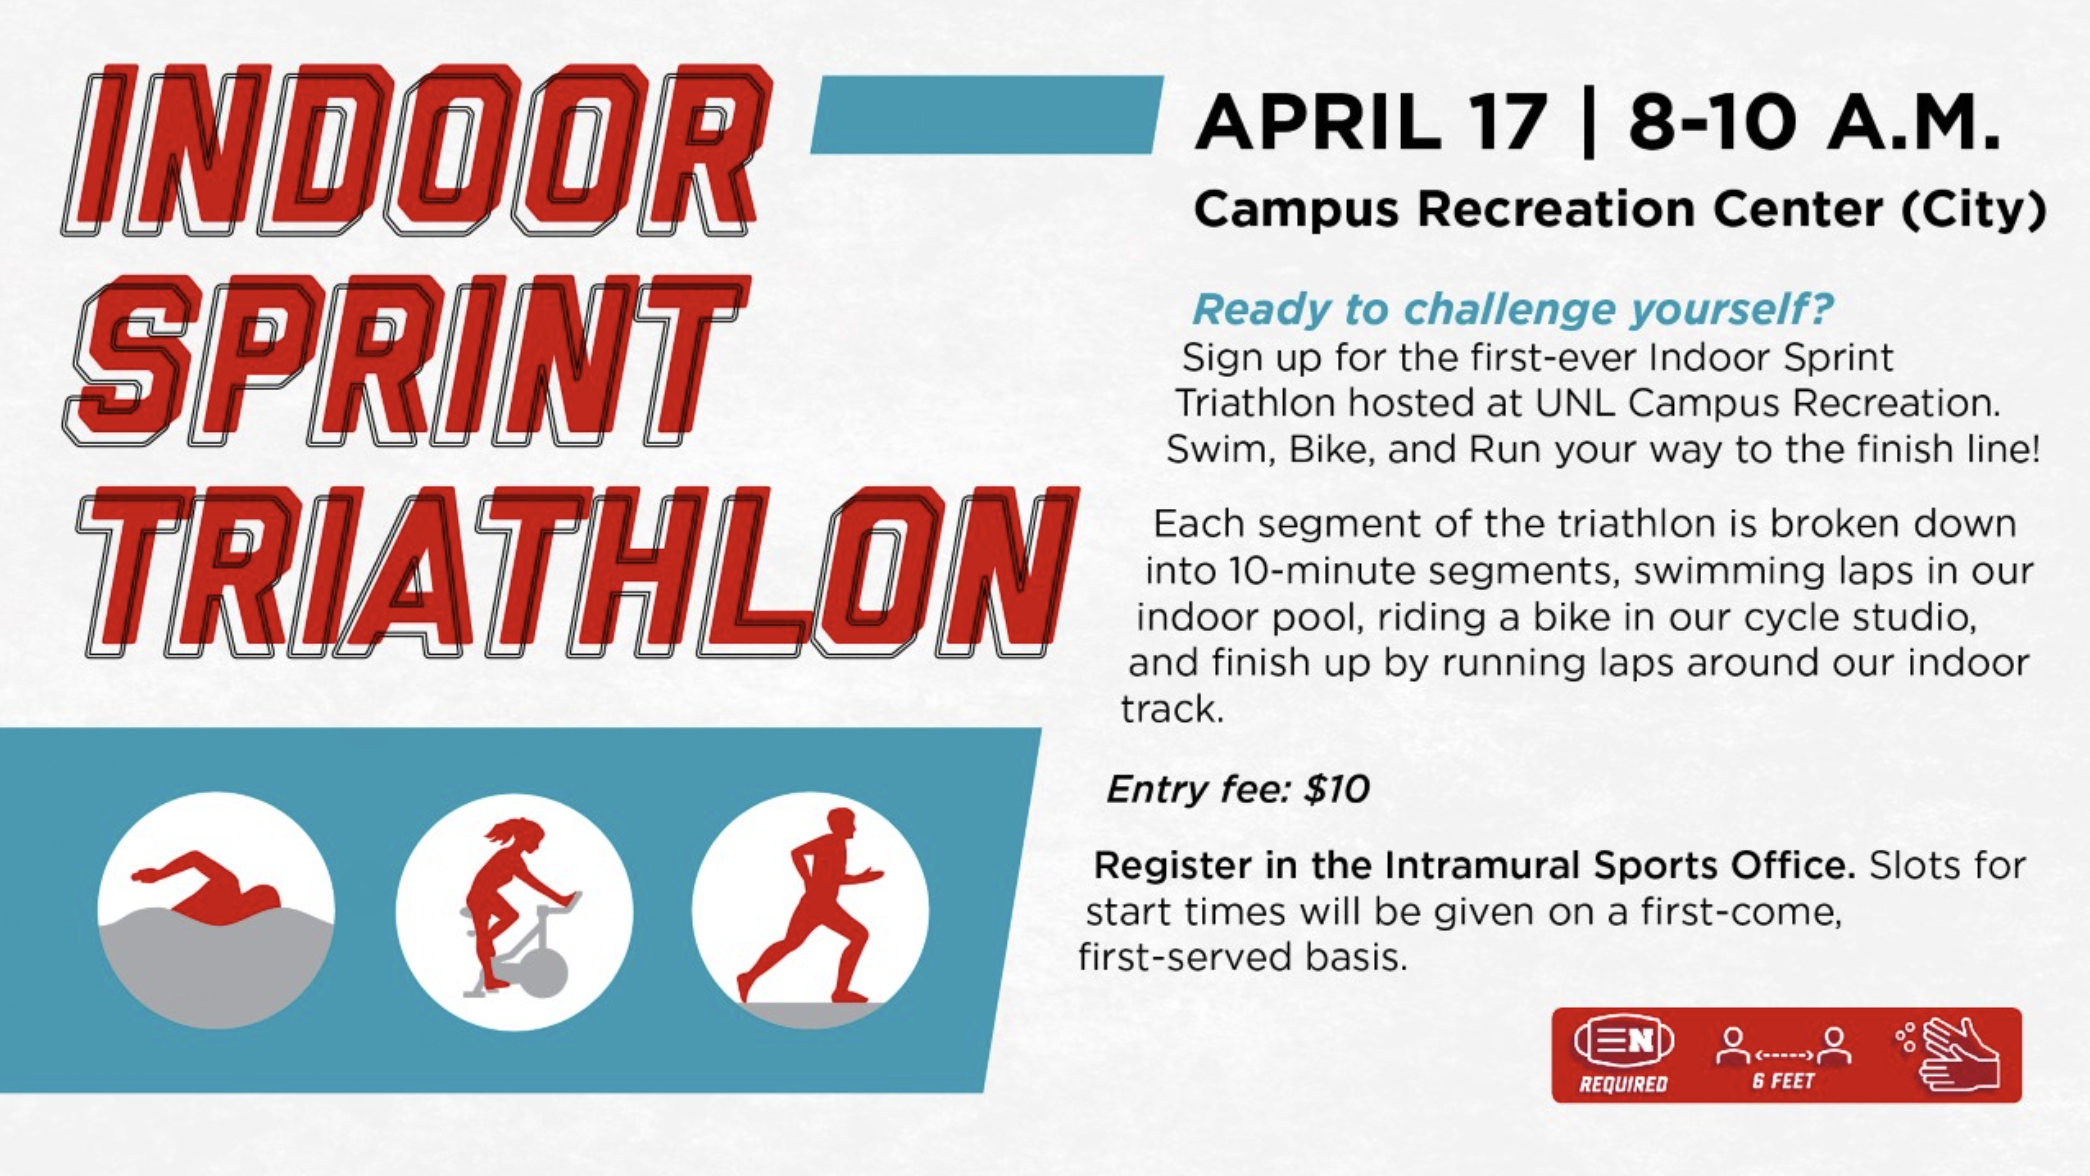 Participate in the Indoor Sprint Triathlon where you will swim, bike and run your way to the finish line.